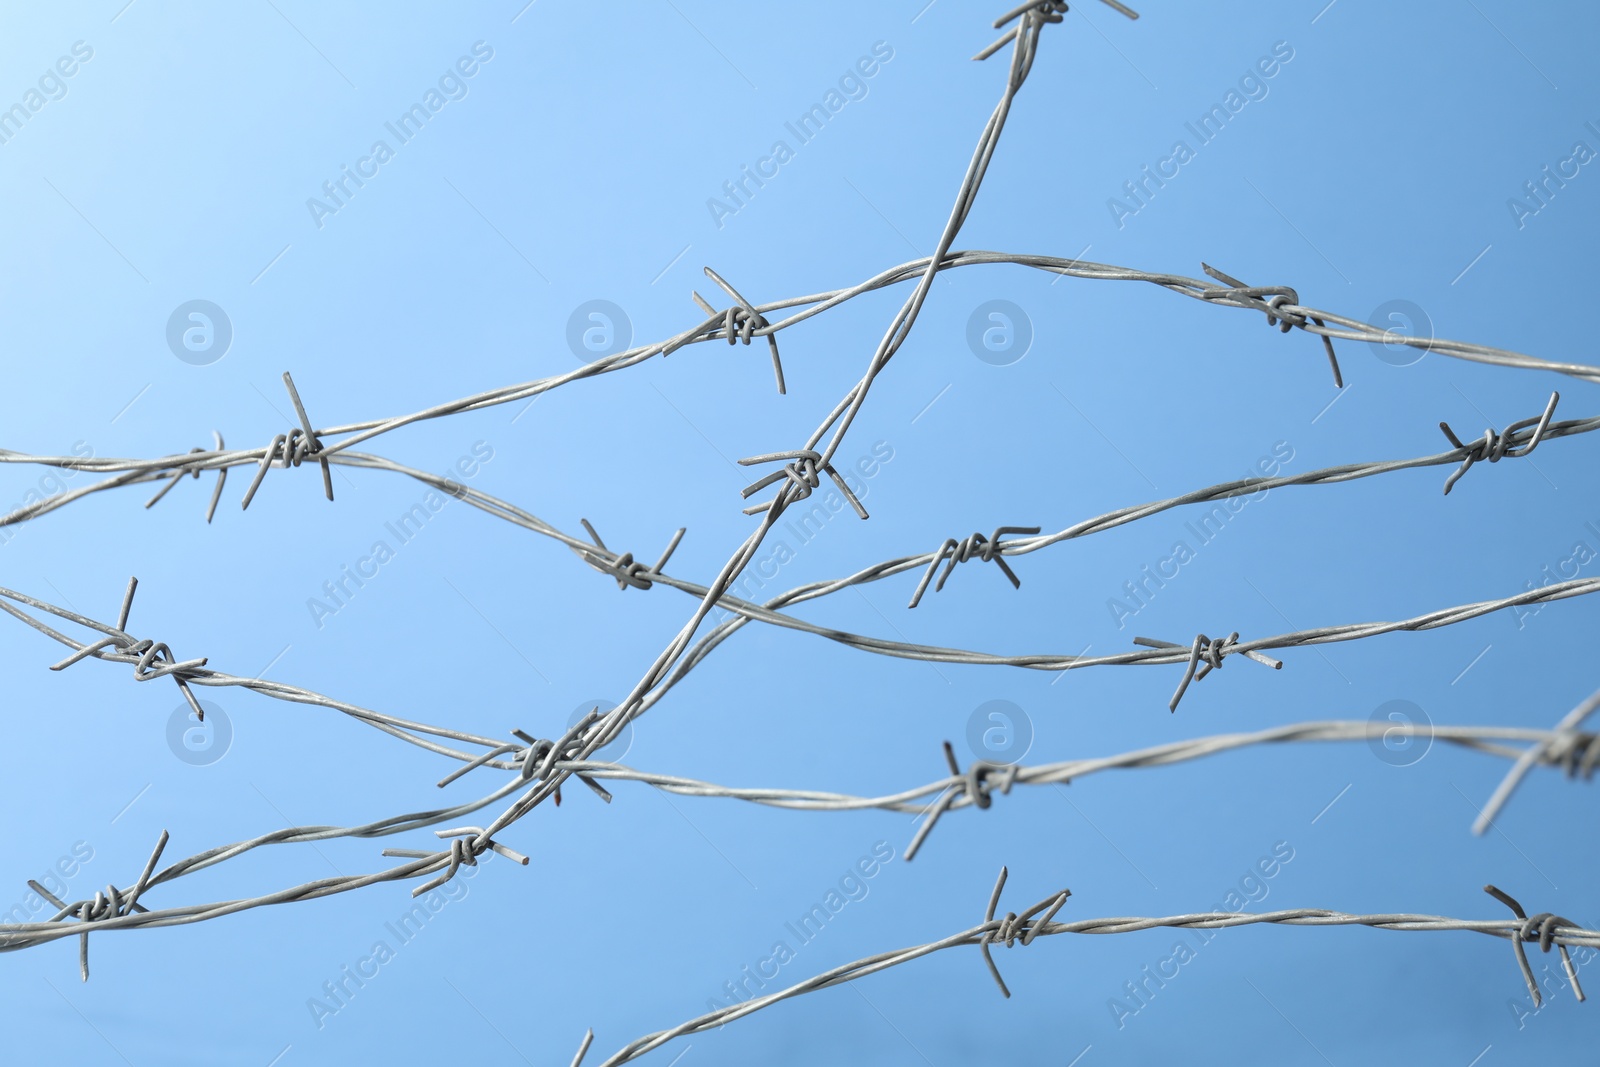 Photo of Metal barbed wire on light blue background